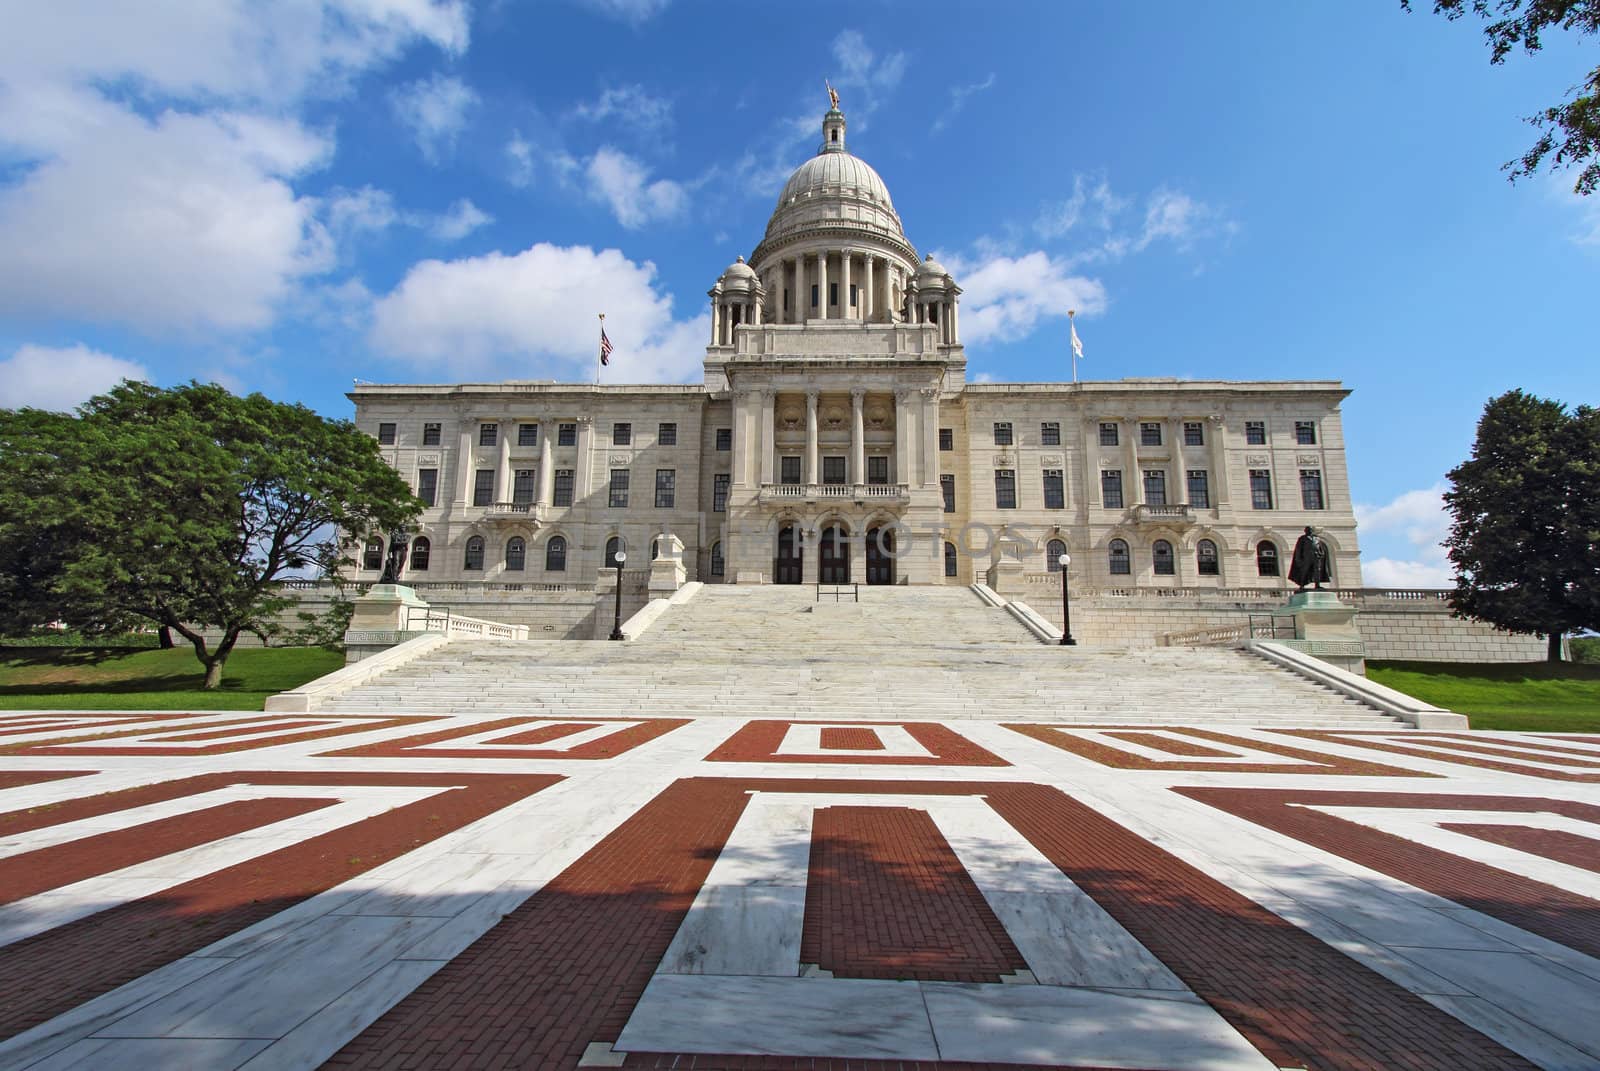 Wide-angle view of the front of the Rhode Island state capitol building with red and white brickwork in Providence with bright blue sky and white clouds in the background. The building is covered with white Georgia marble and was constructed from 1895 to 1904.